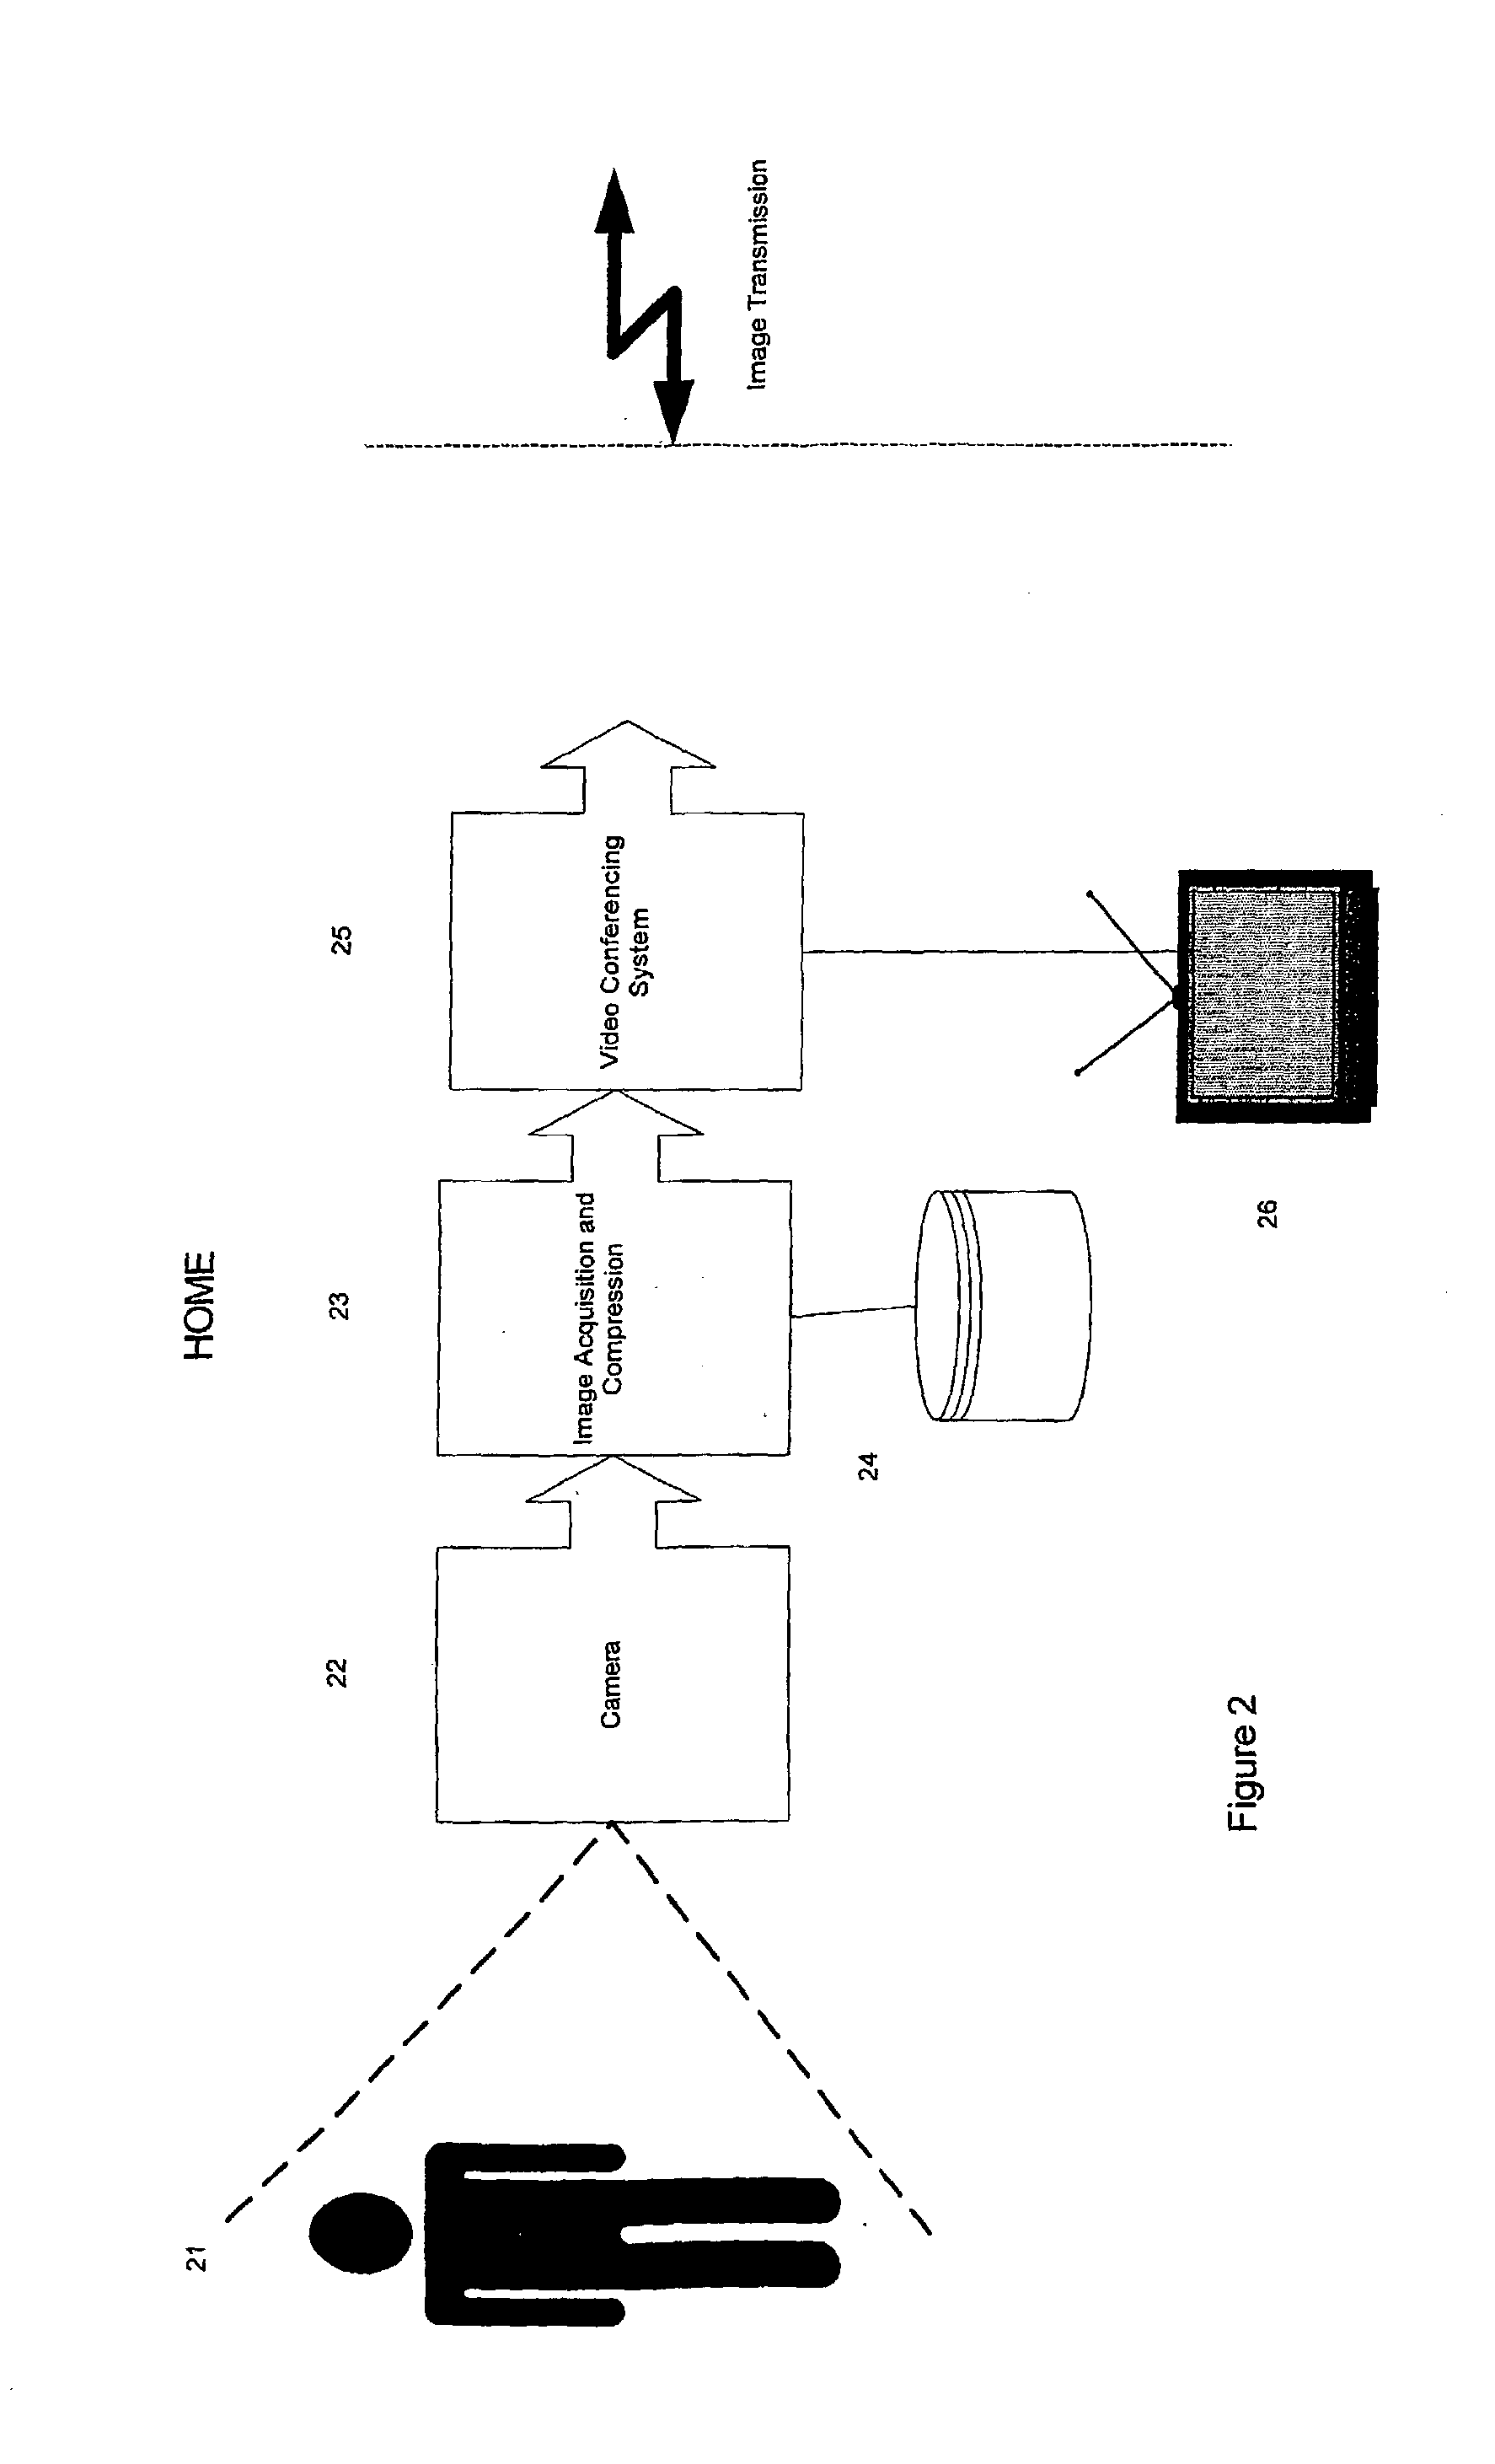 Method and apparatus for remote medical monitoring incorporating video processing and system of motor tasks